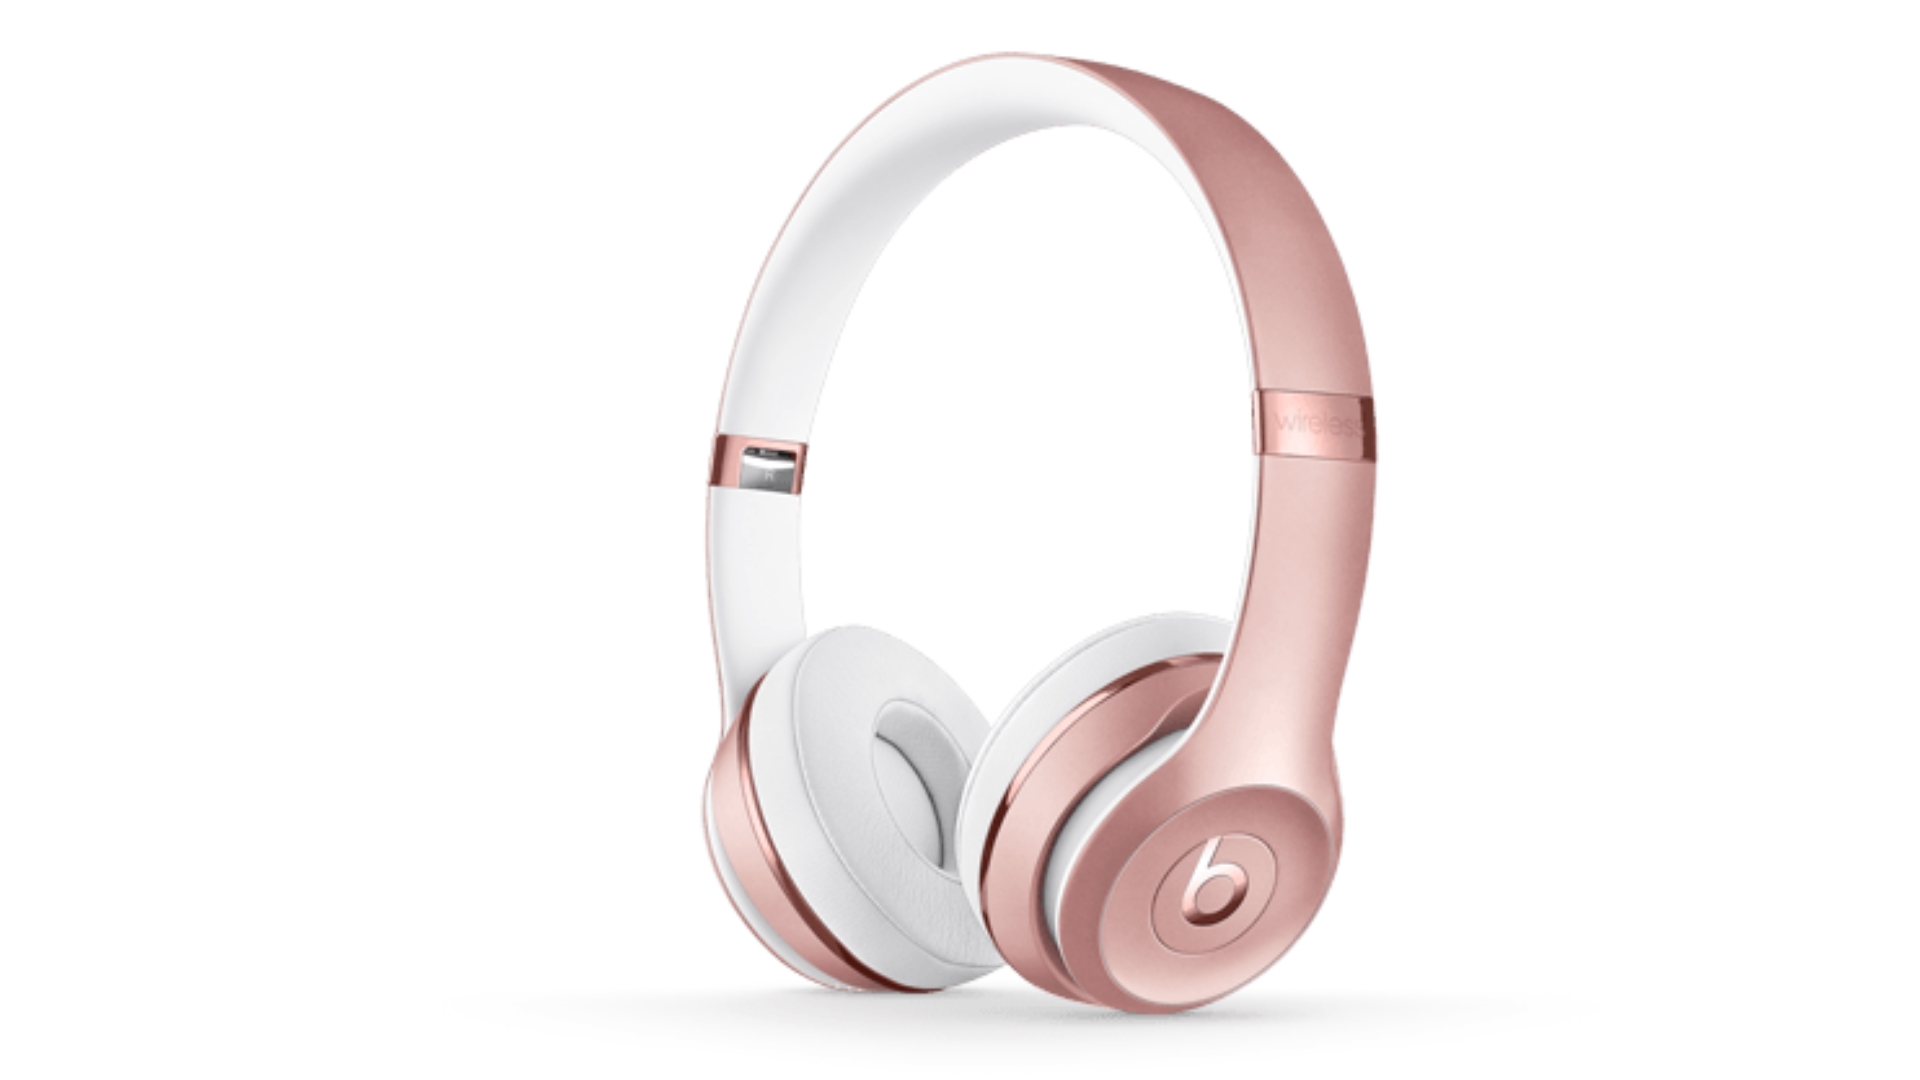 The Beats Solo 3 Wireless headphones are the most popular model, offering an on-ear design